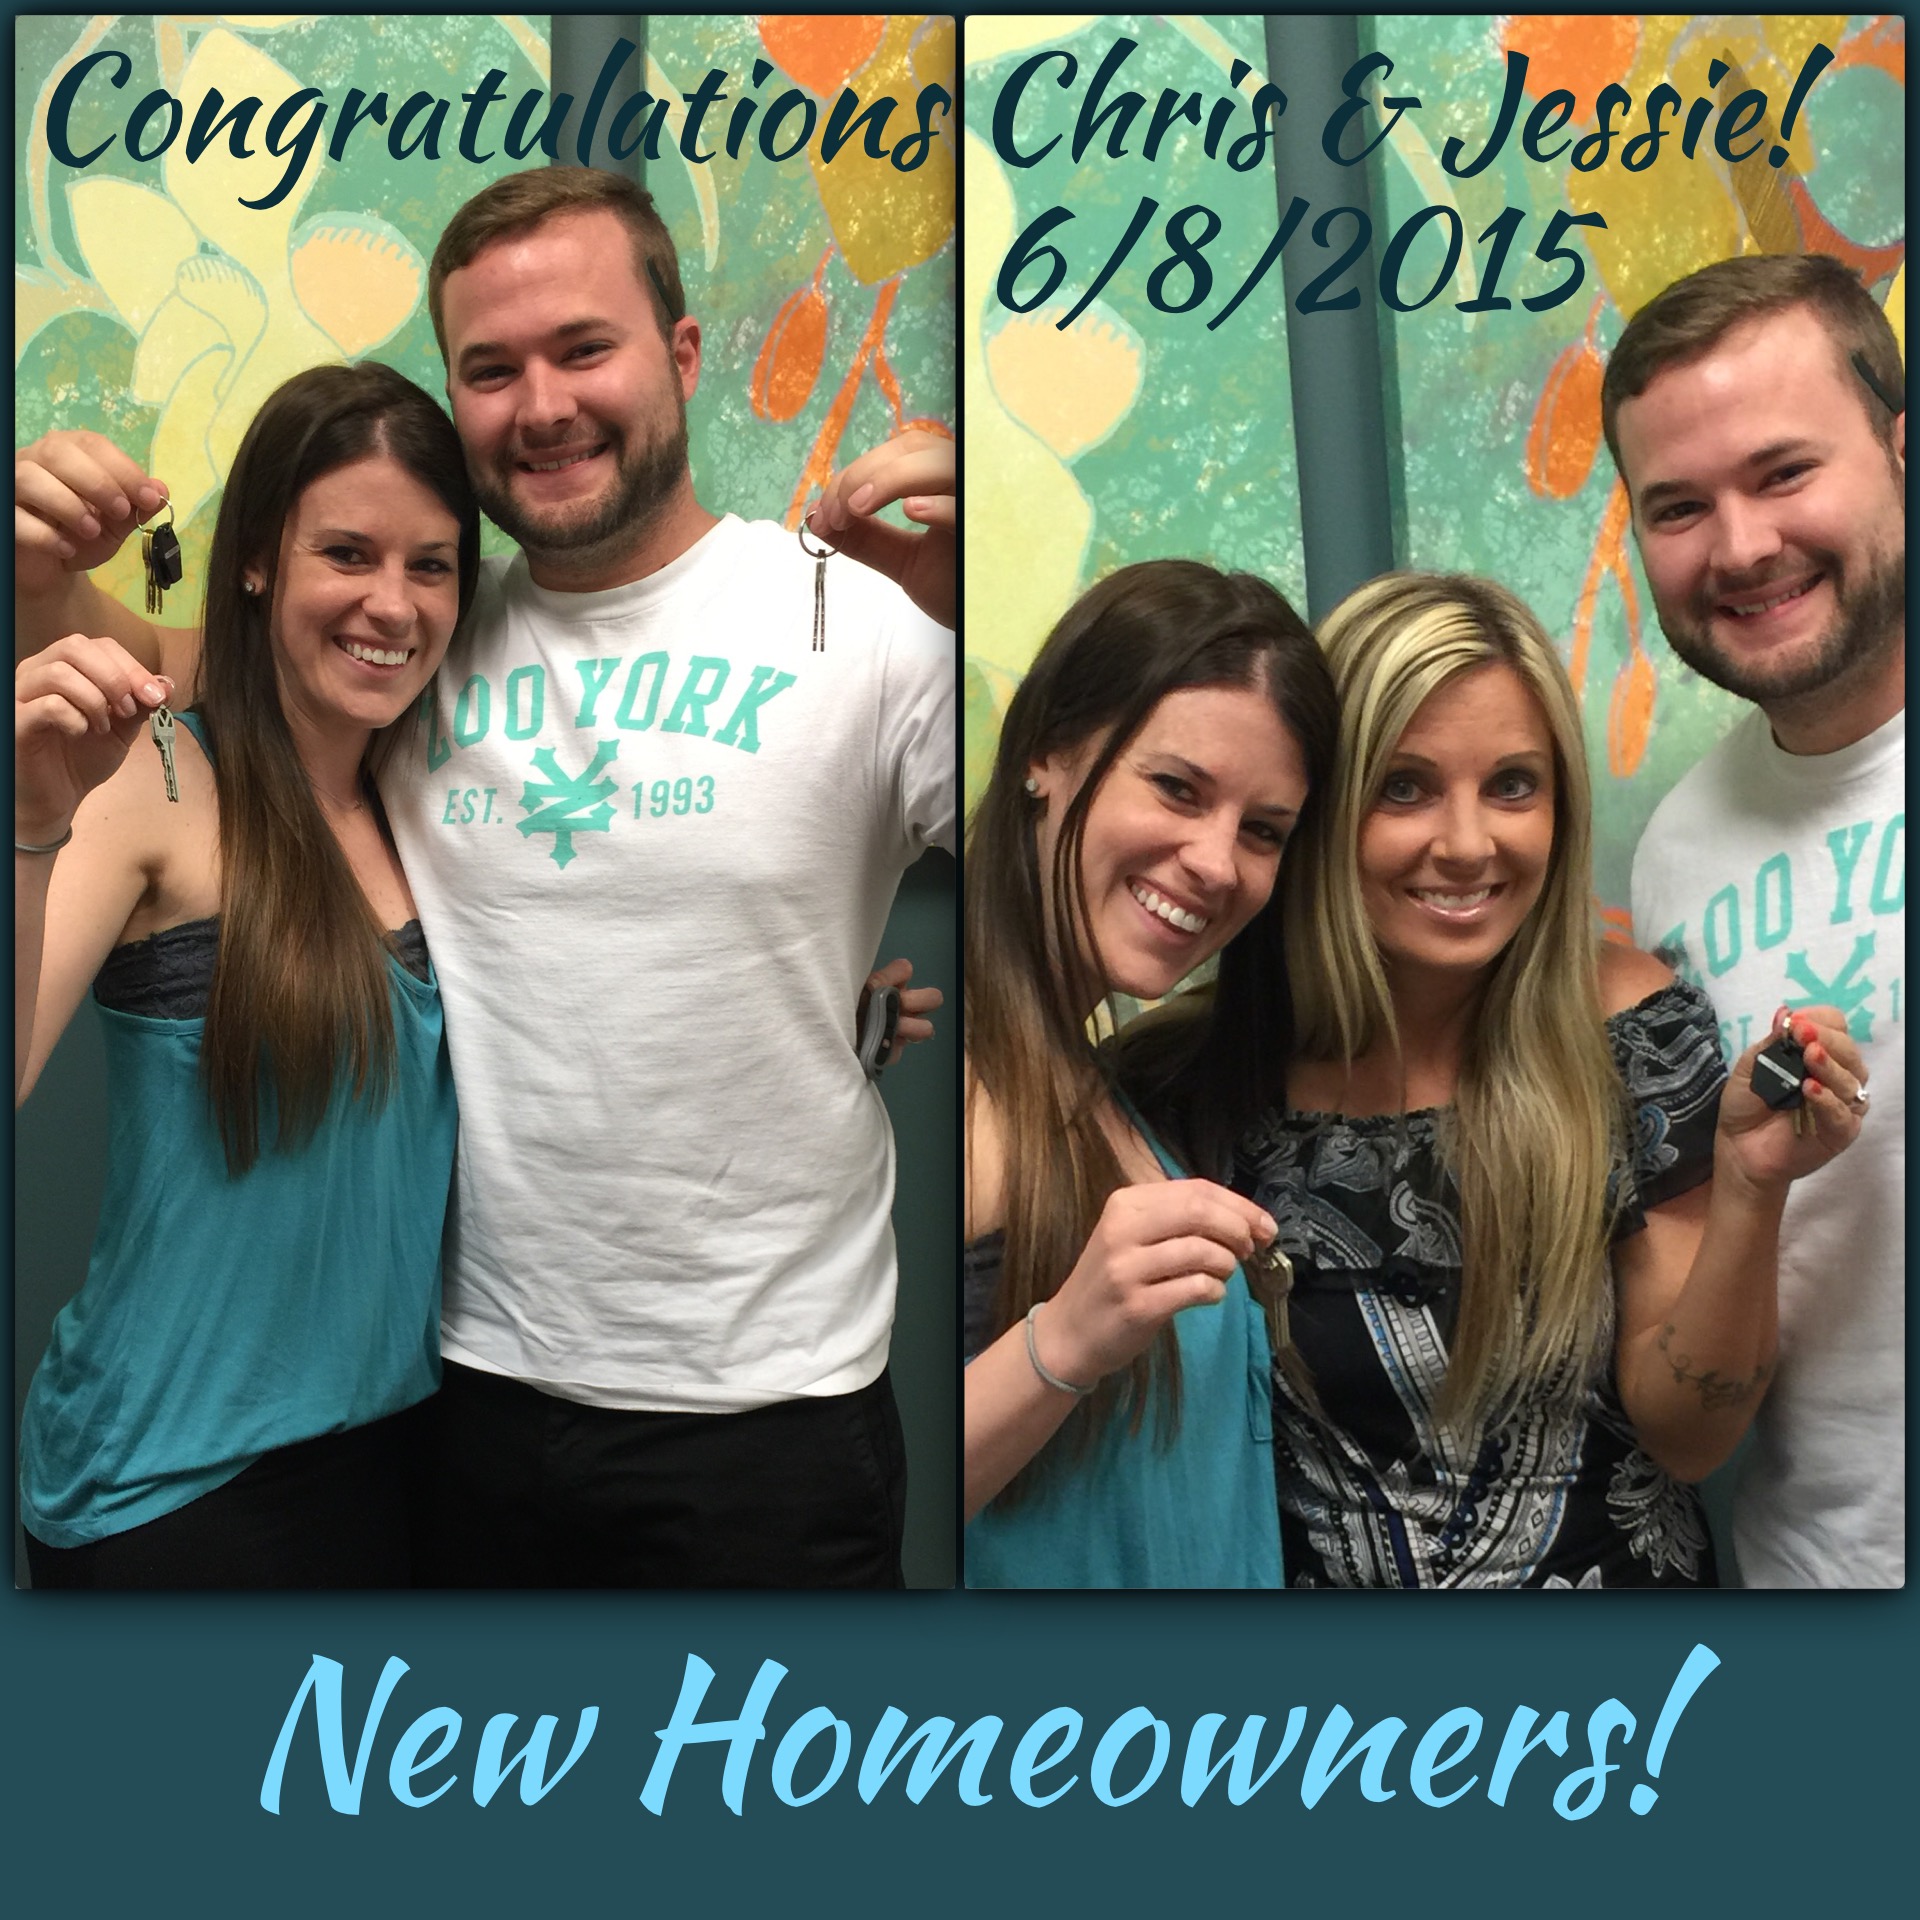 First Home and it is BEAUTIFUL! Congratulations Chris & Jessie!